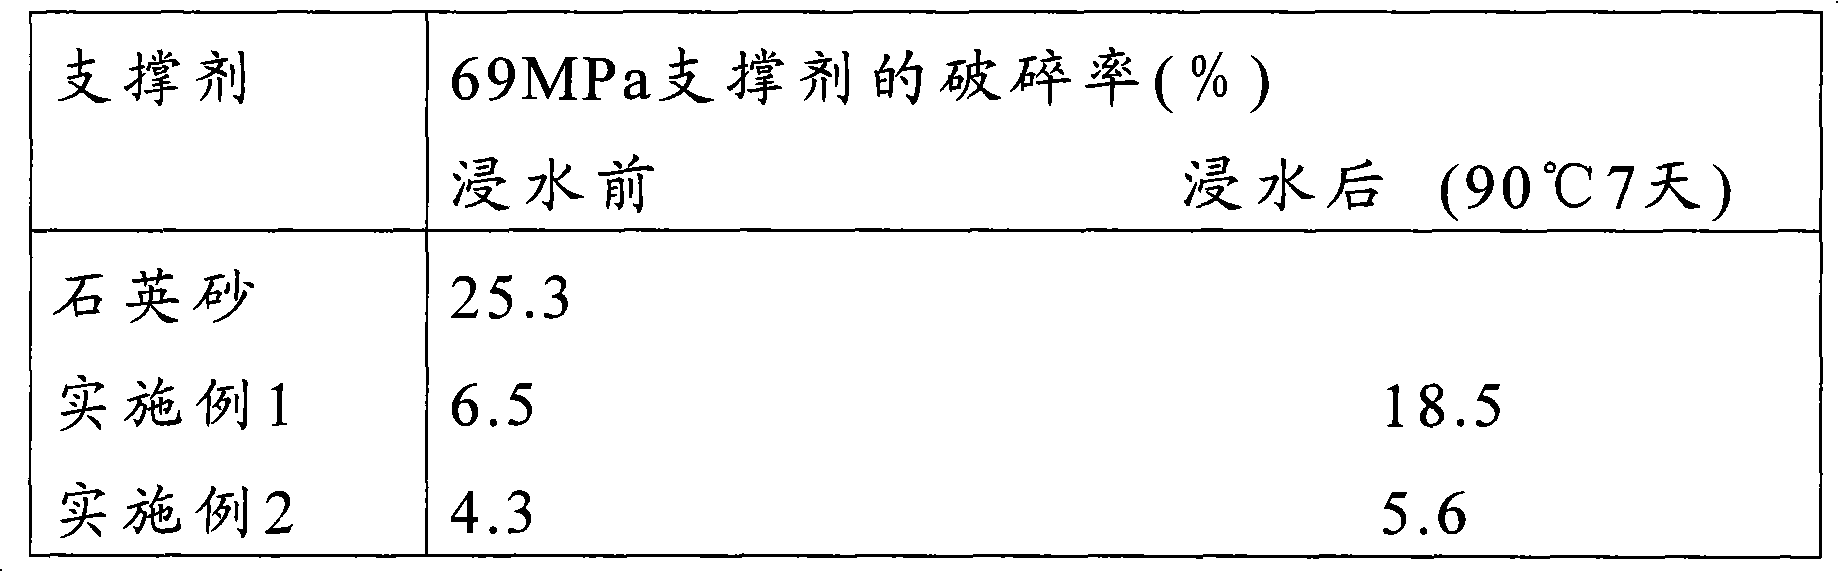 Precured resin coated propping agent and preparation method thereof